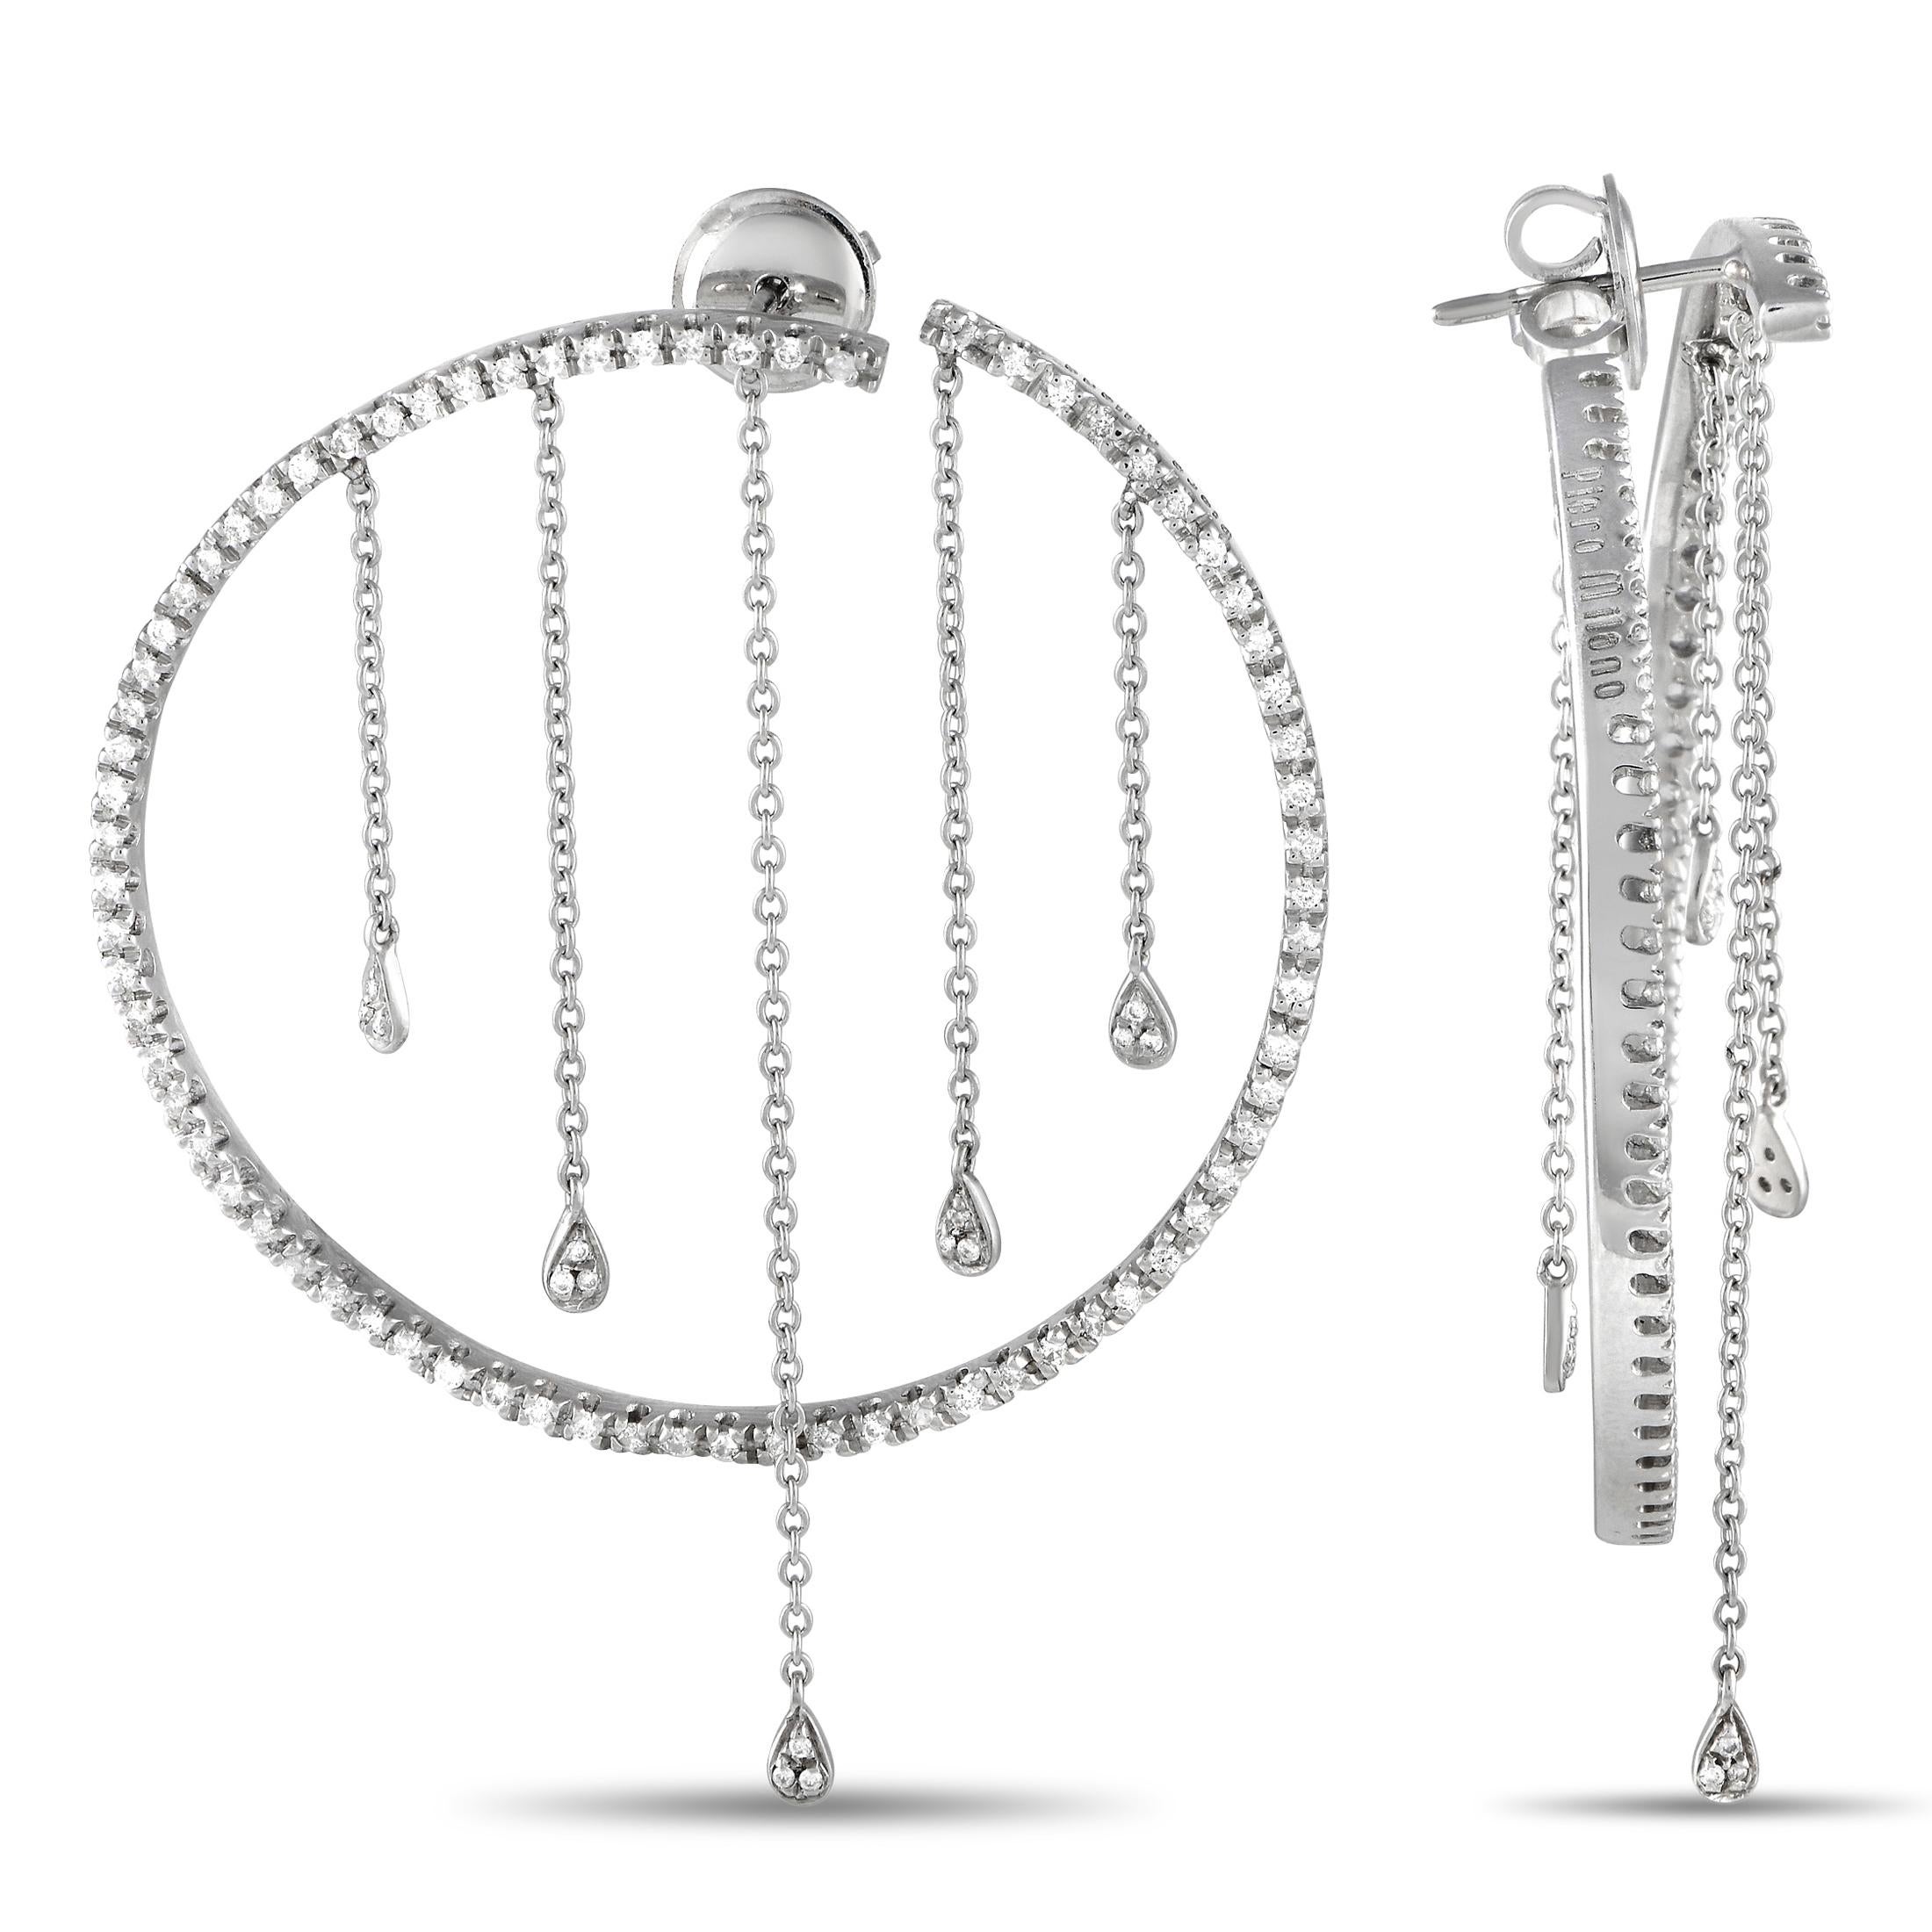 Make a sparkling statement by adding these Piero Milano to any ensemble. Crafted from 18K white gold, each one features a circular setting measuring 1.75” round. Dangling chains give them a surprising sense of movement, while diamonds totaling 1.10